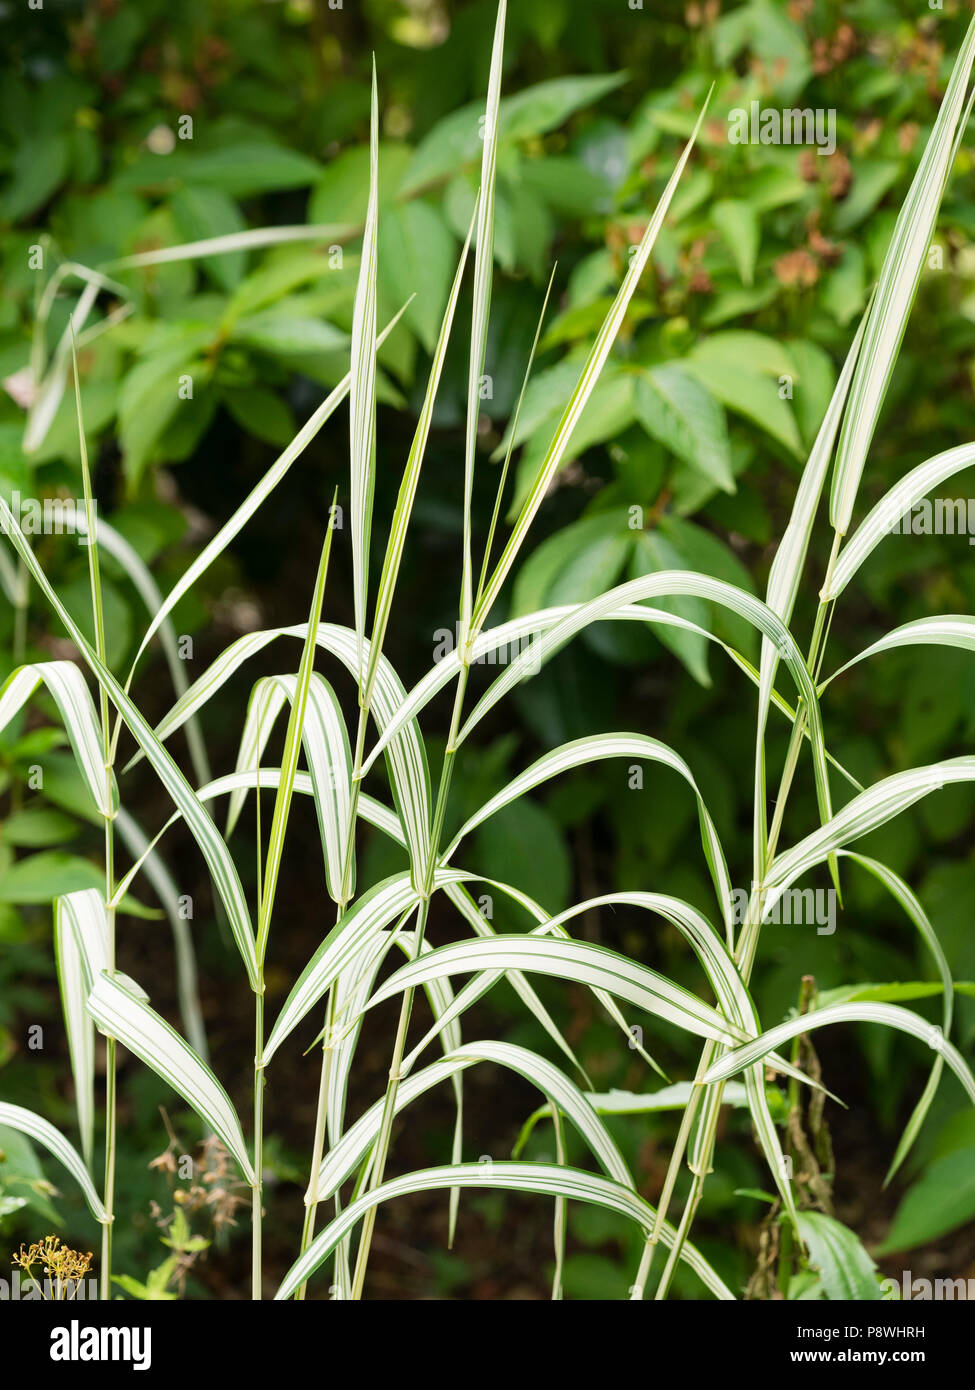 Variegated white and green leaves and stems of the hardy perennial (invasive) ornamental grass, Phalaris arundinacea var. picta Stock Photo